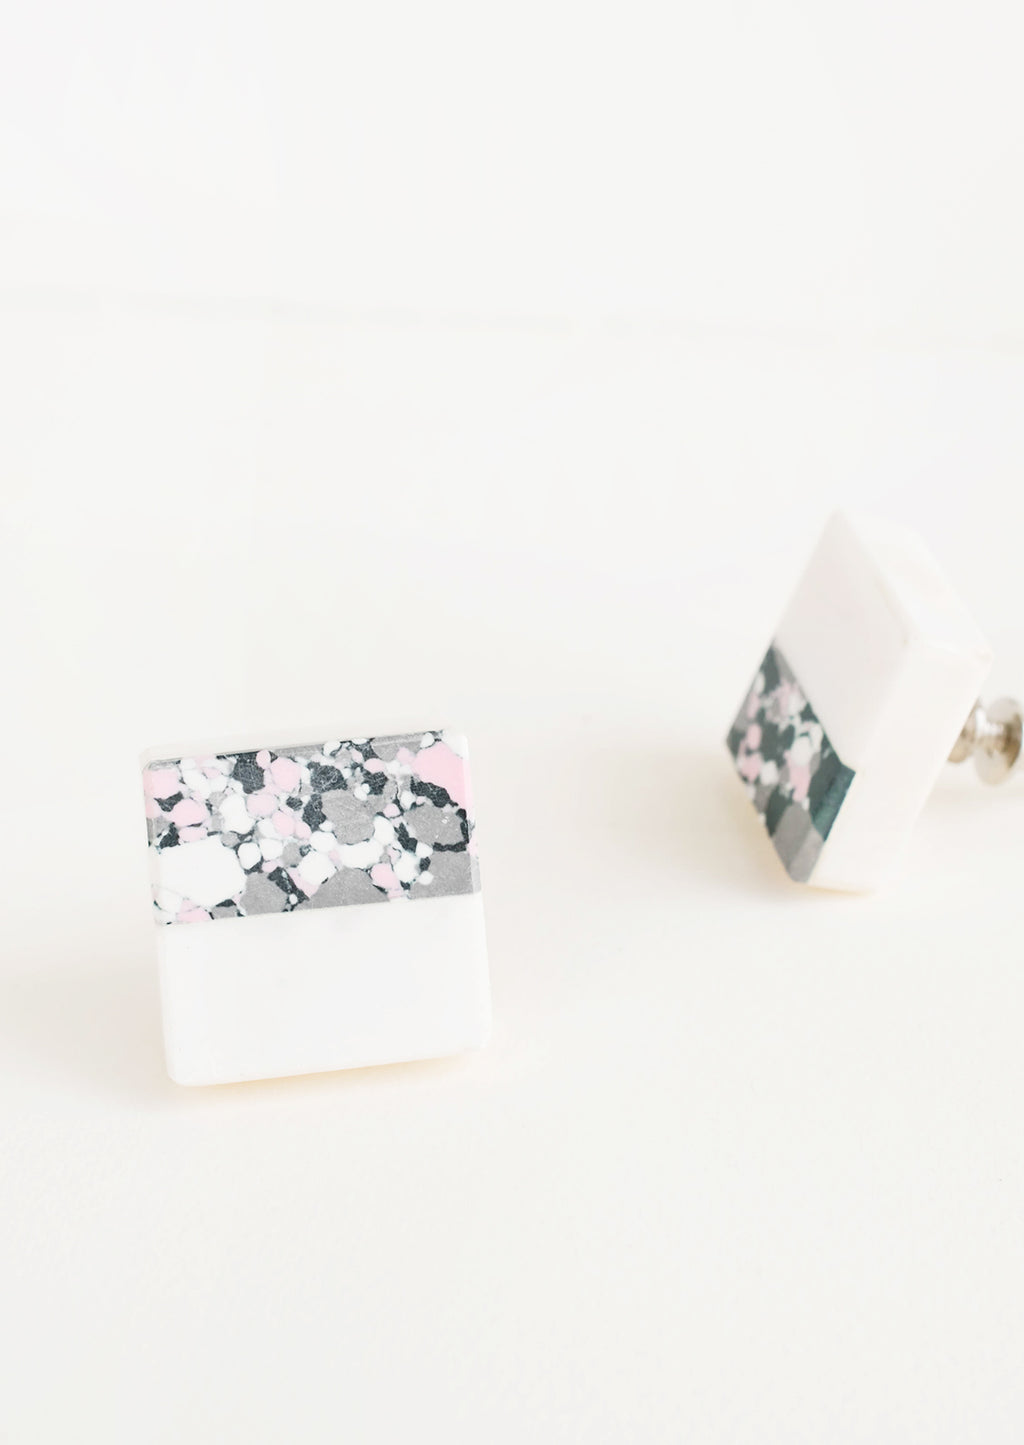 2: Square cabinet knob with white marble bottom half and splattered paint top half